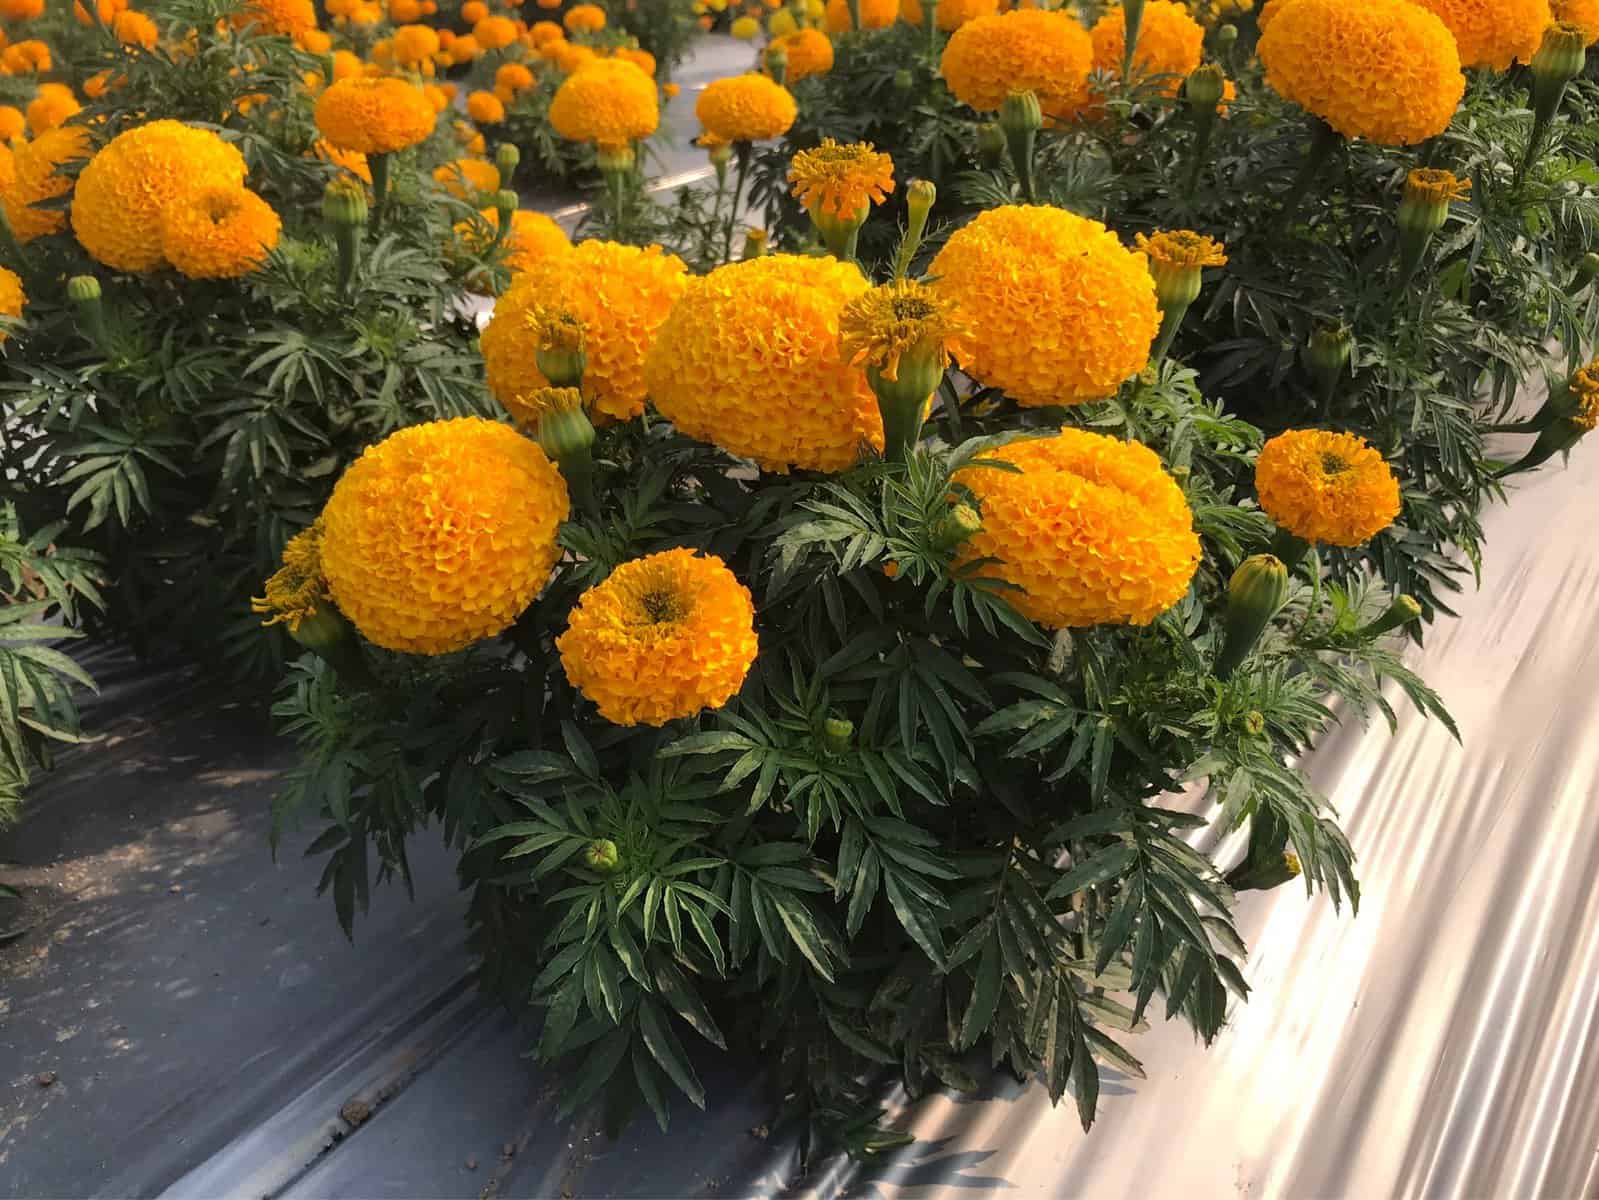 Siam Gold marigold have flowers 2 to 2 1/2 inches wide.